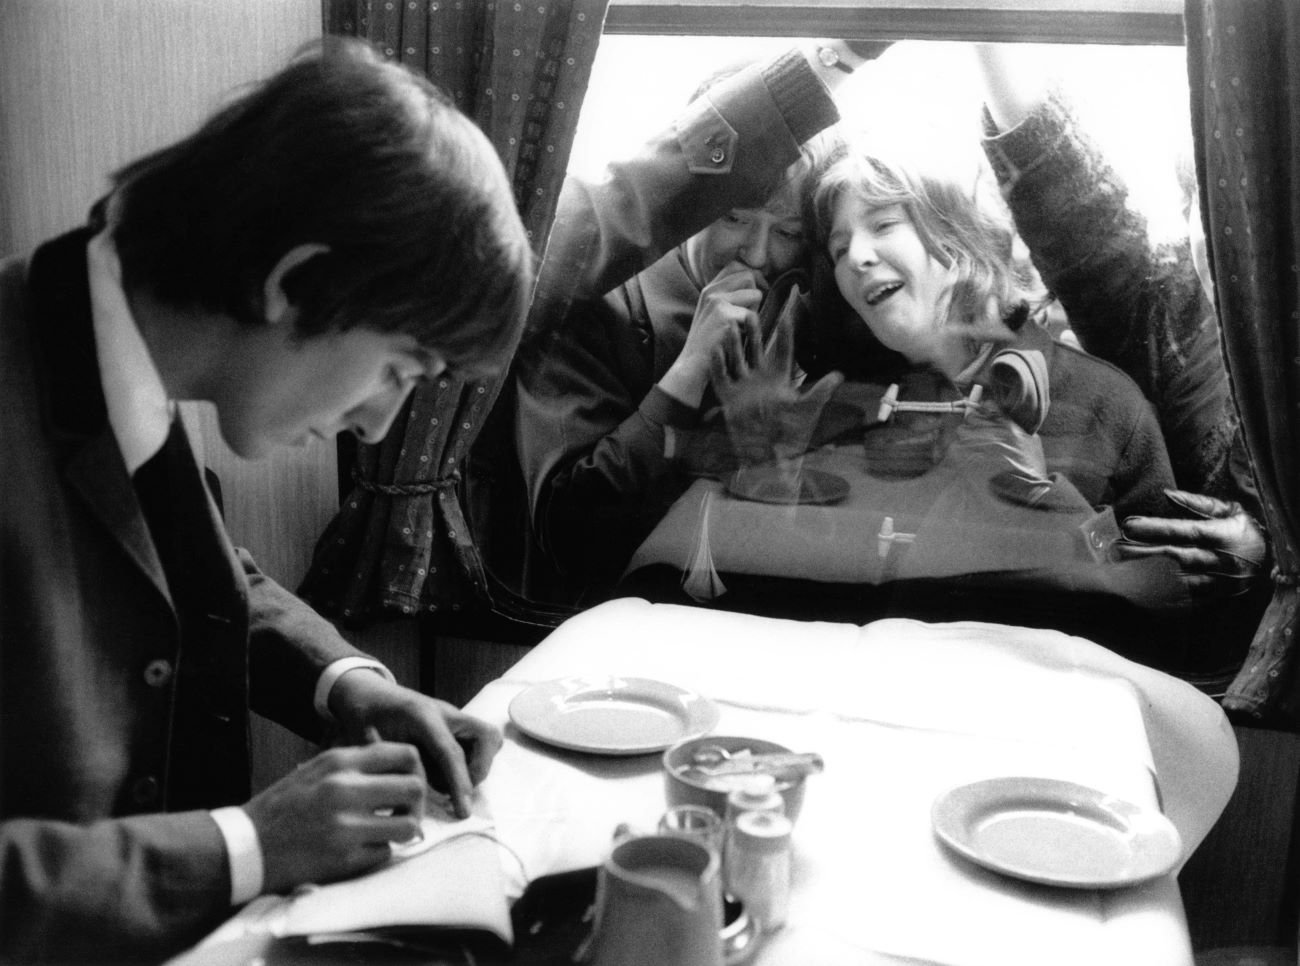 A black and white picture of George Harrison sitting at a table while fans look at him through the window.